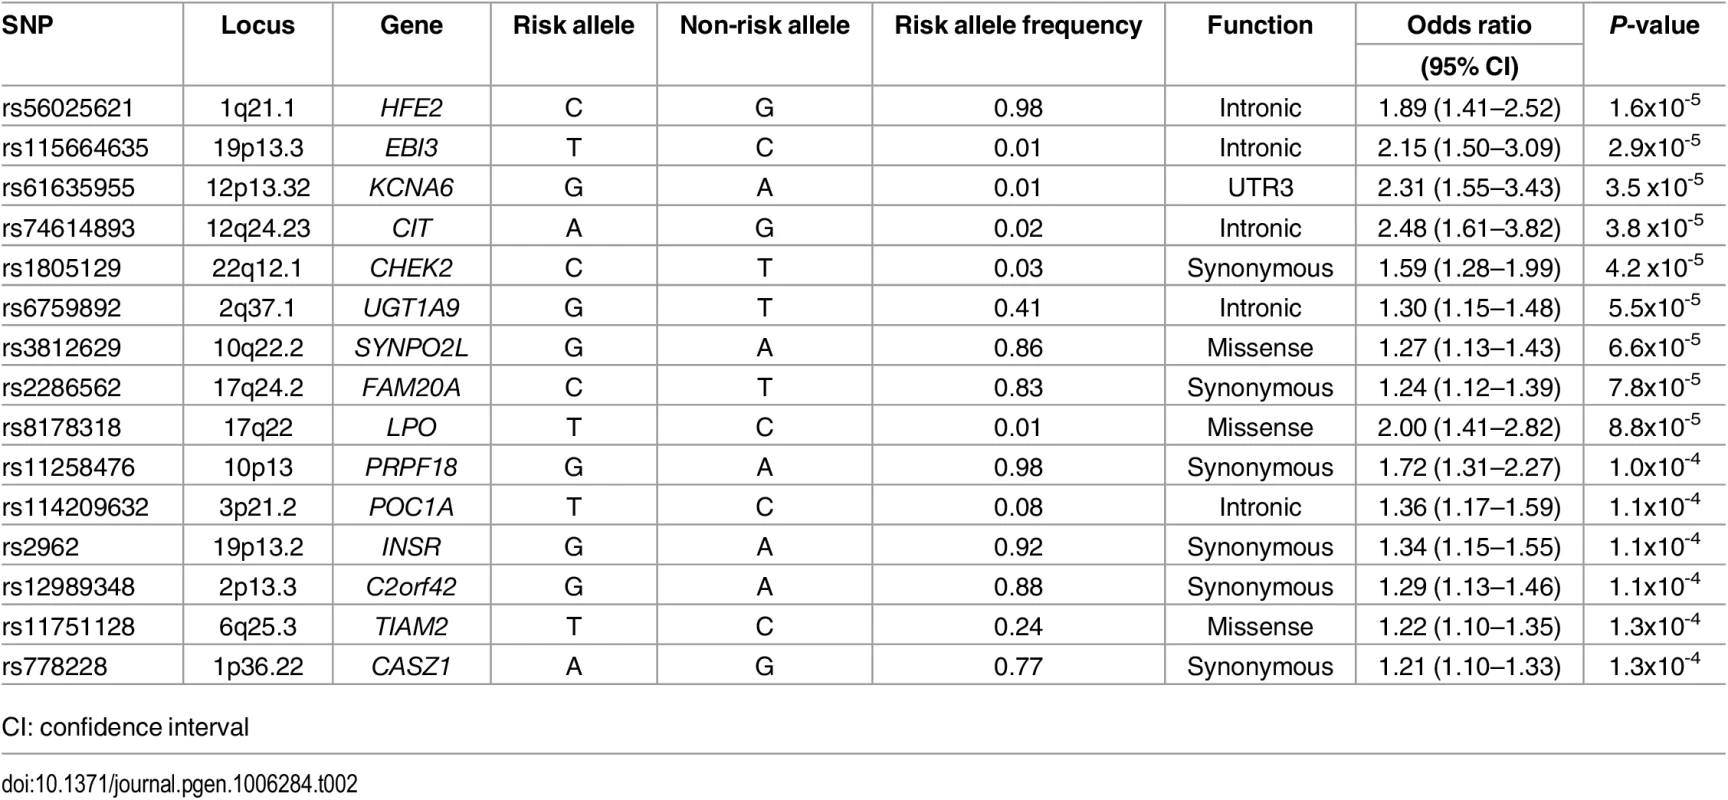 Most significant common variants associated with atrial fibrillation.